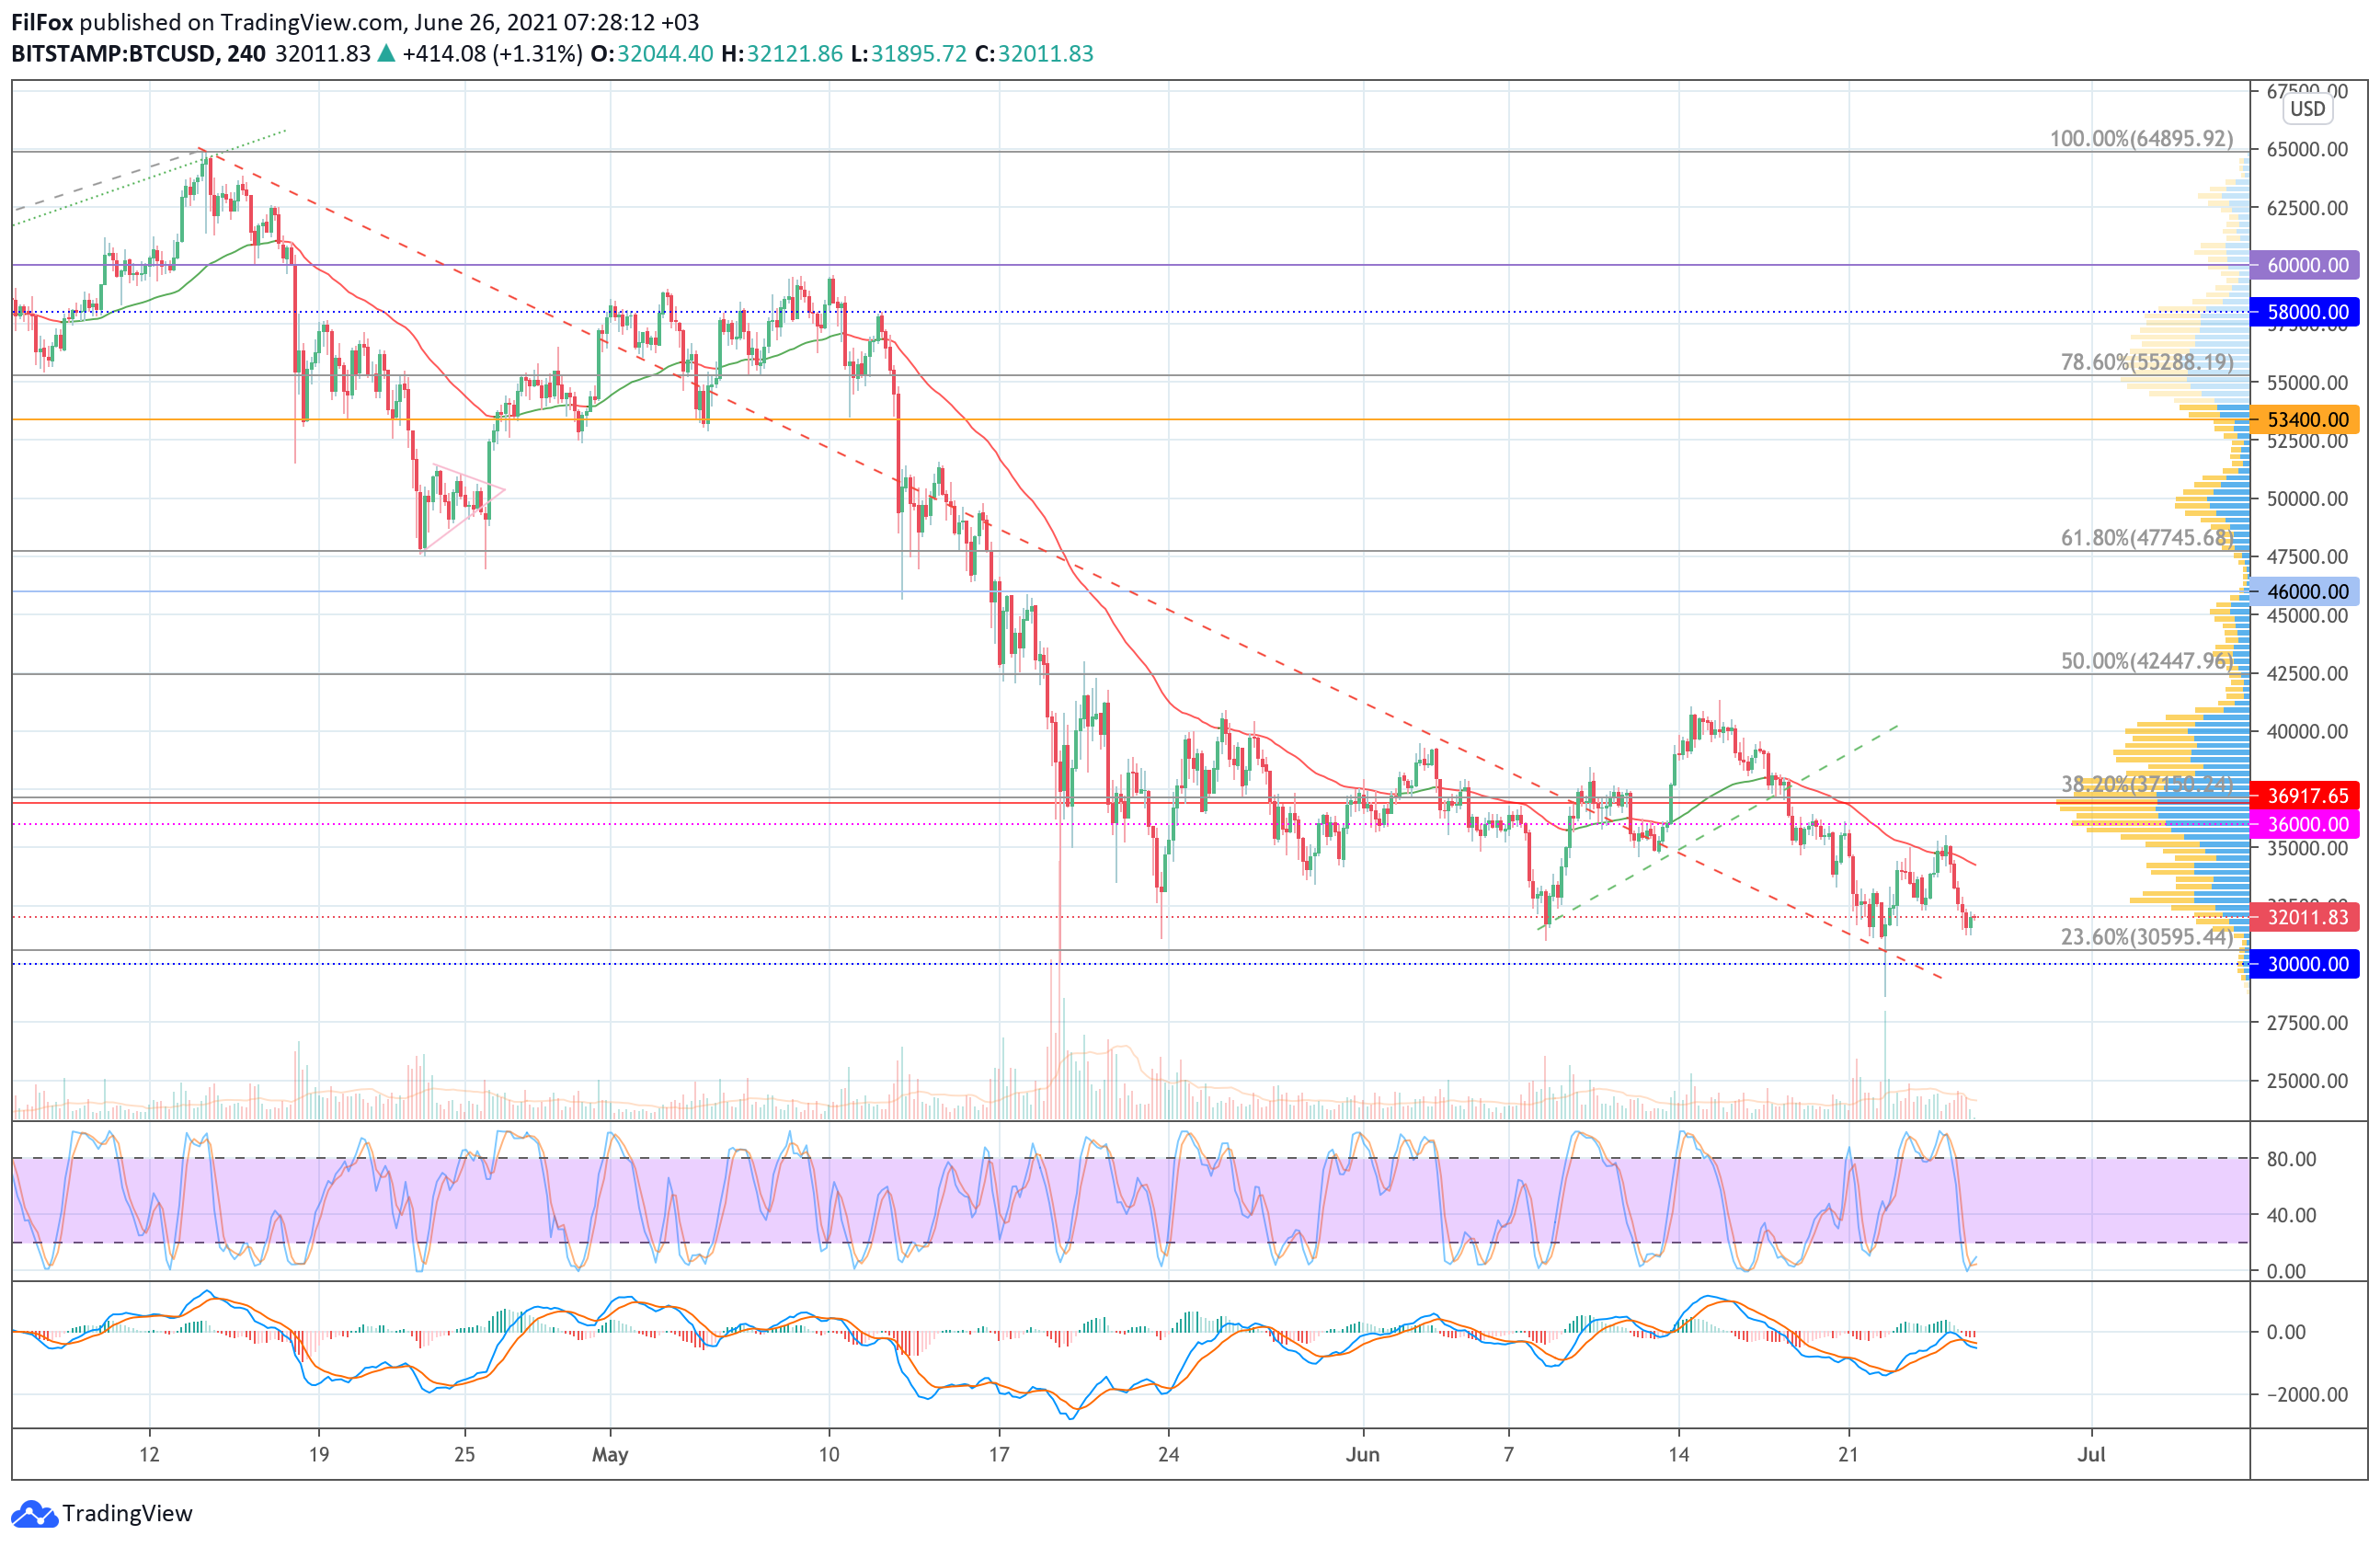 Analysis of prices for Bitcoin, Ethereum, XRP for 06/26/2021